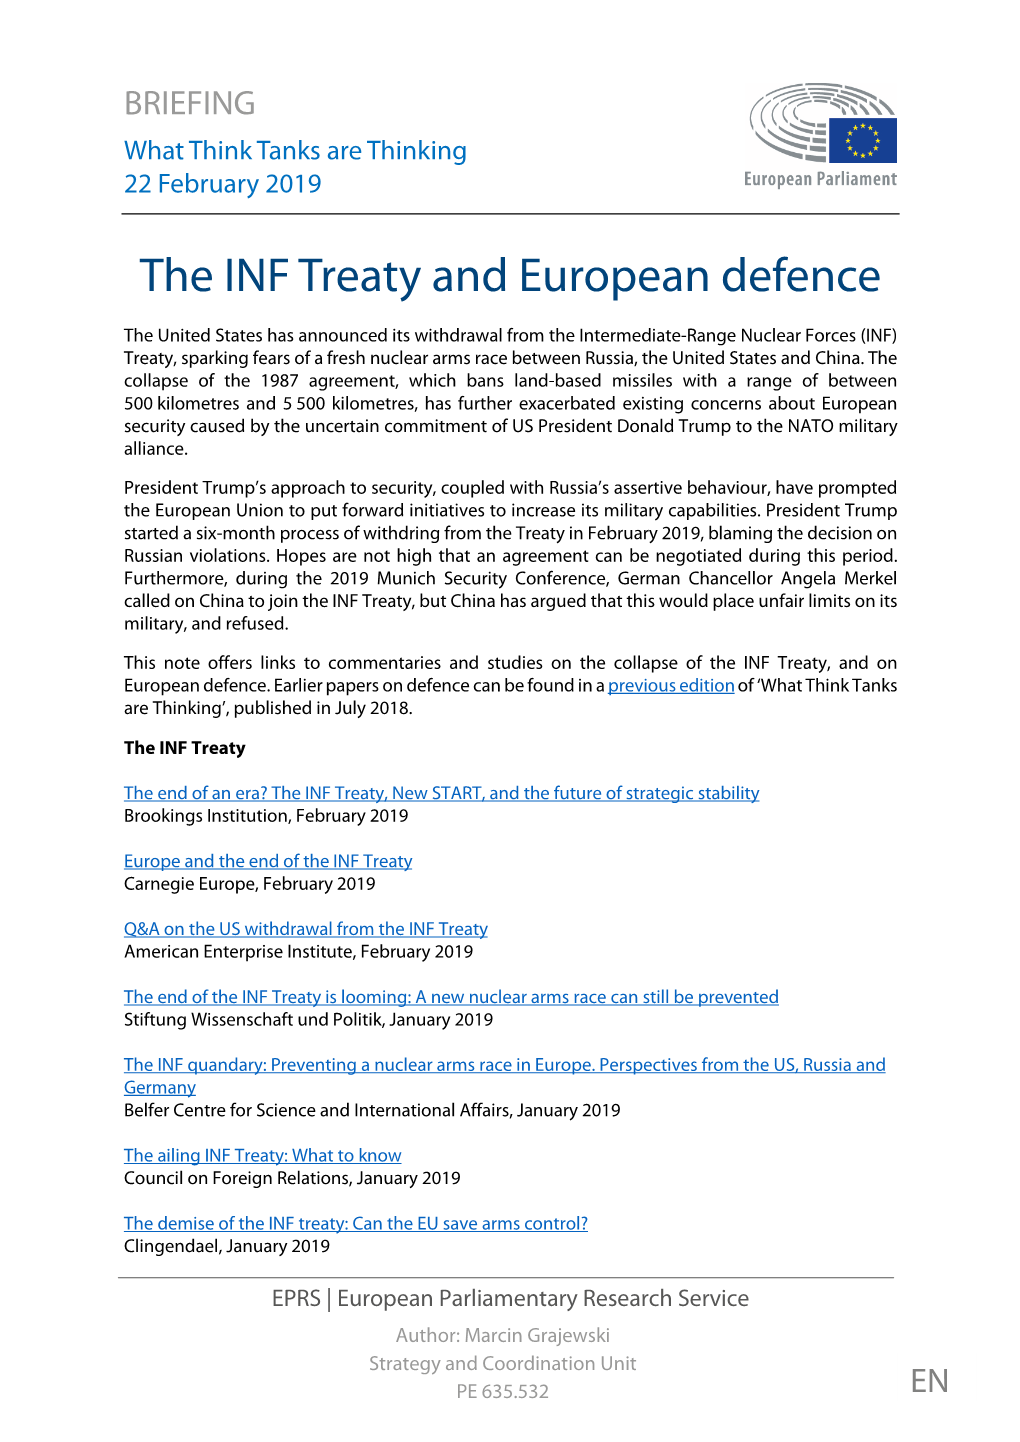 The INF Treaty and European Defence